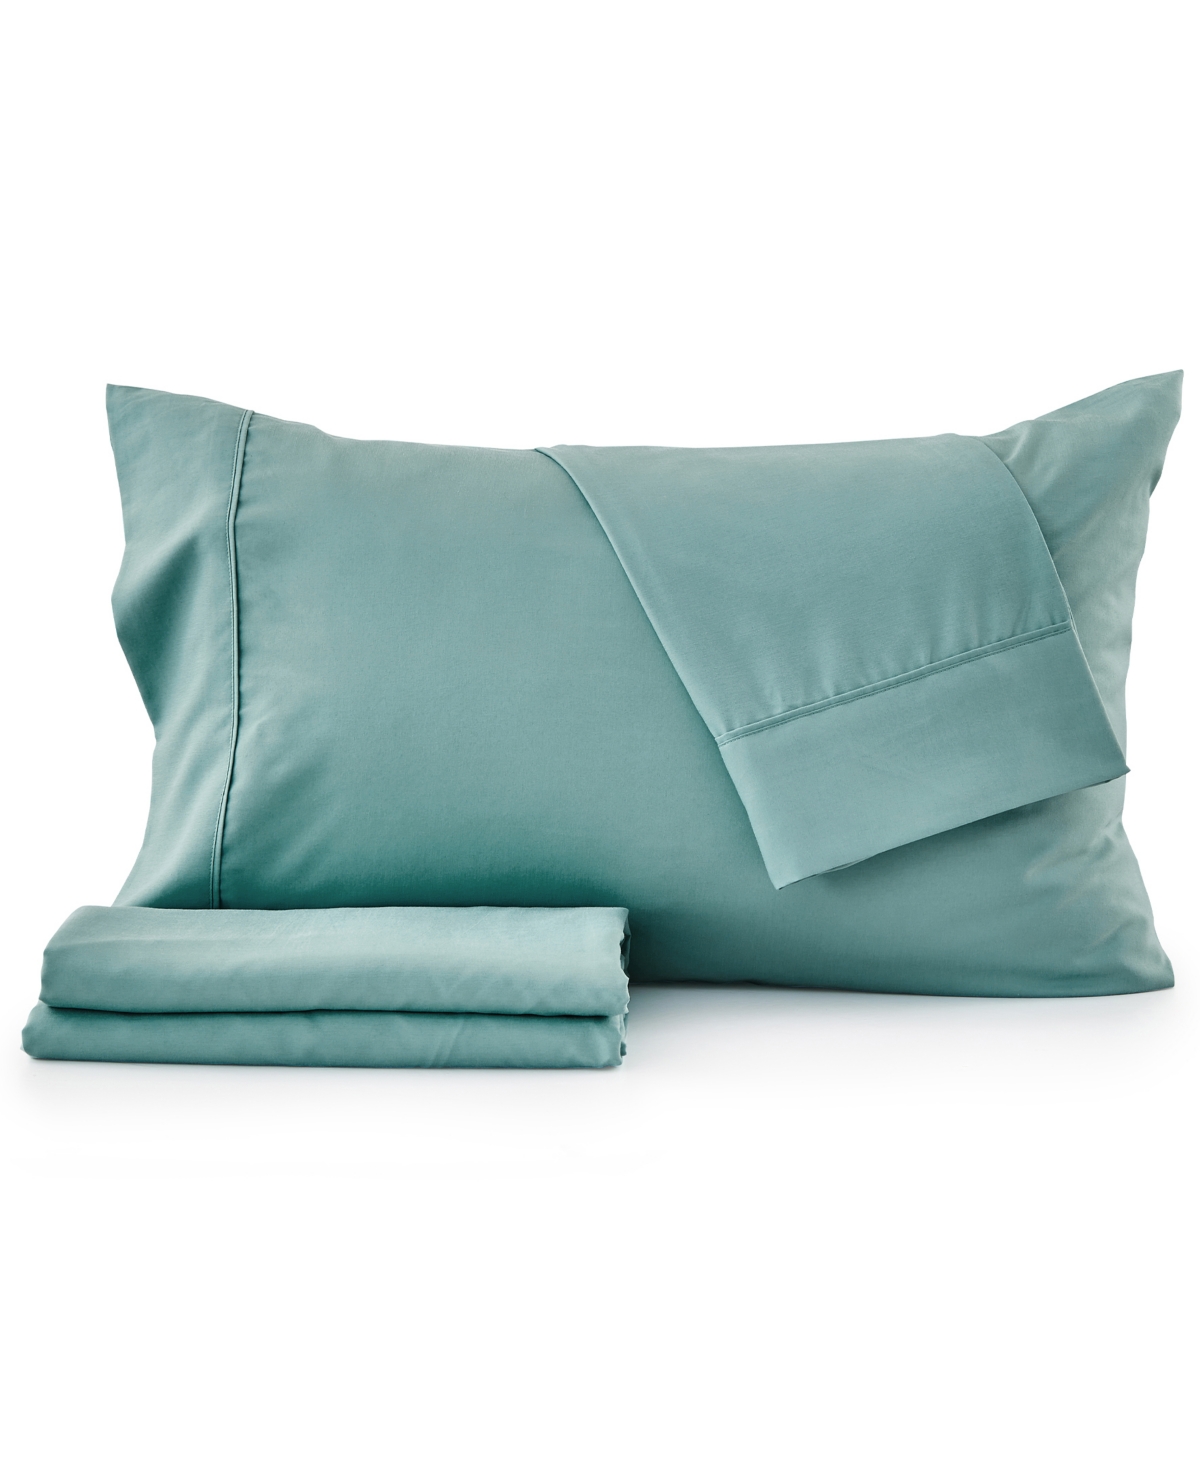 Premium Comforts Rayon From Bamboo Blend Crease-resistant 4 Piece Sheet Set, Queen In Sea